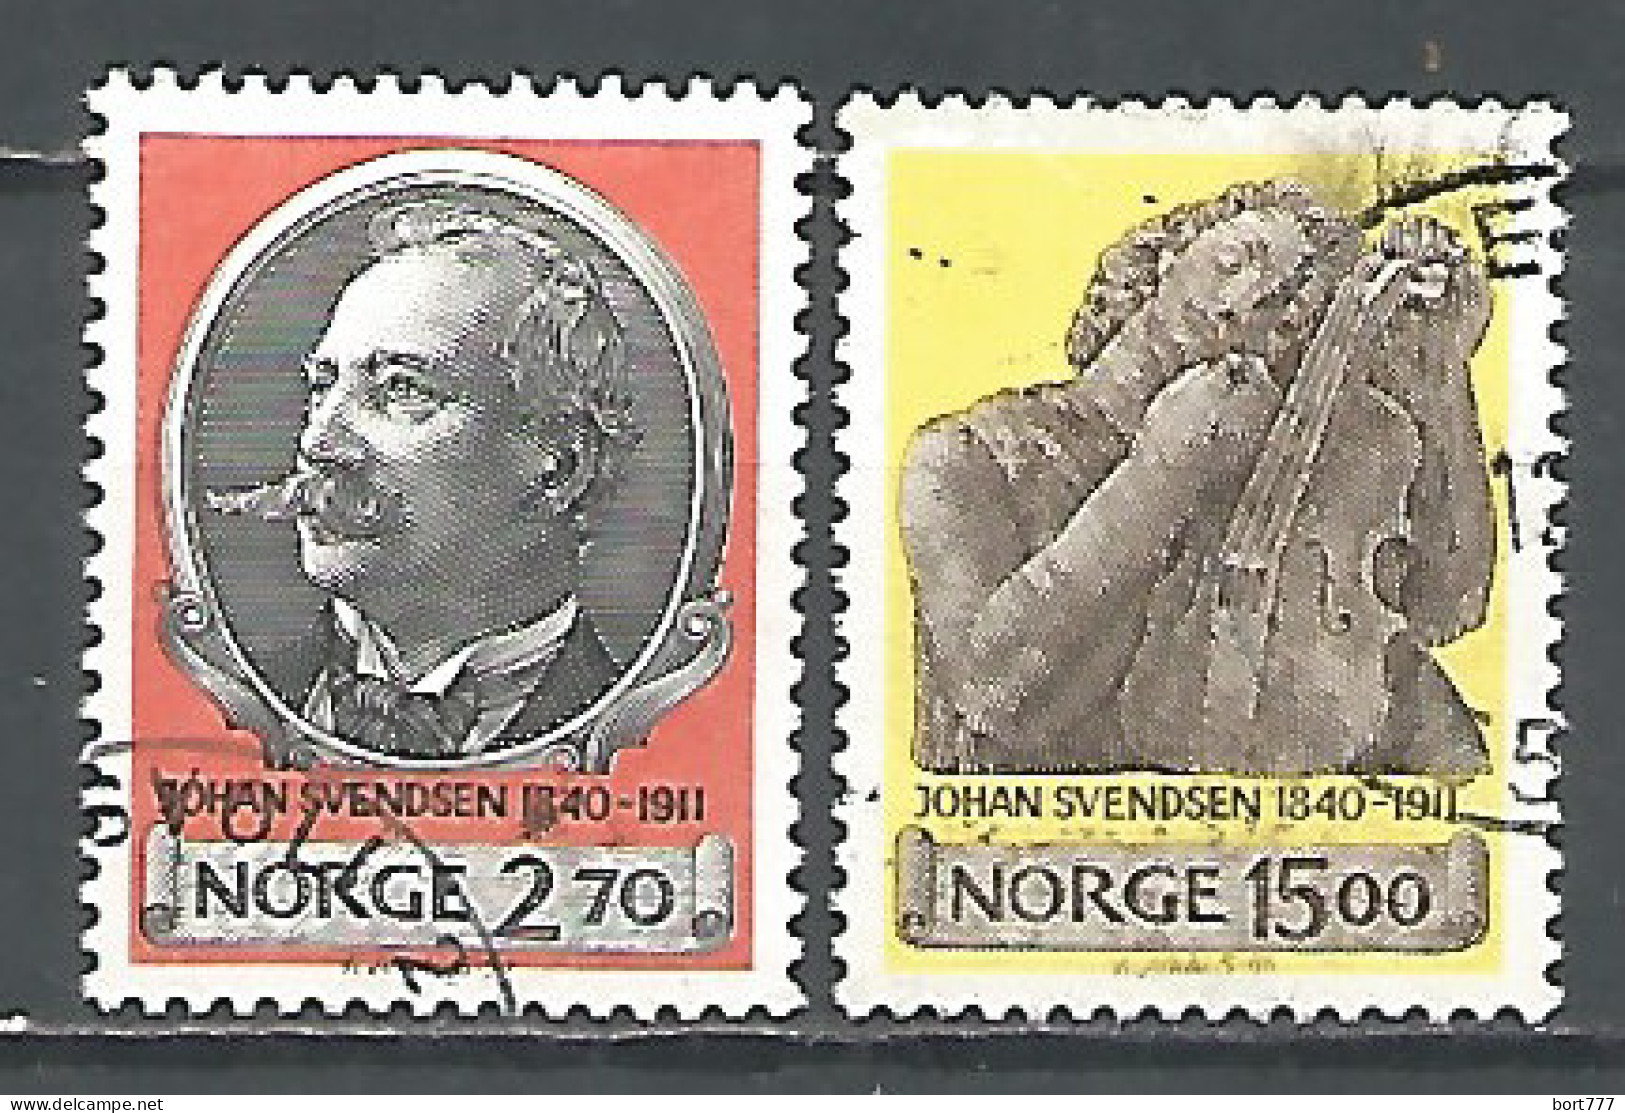 Norway 1990 Used Stamps  - Gebraucht